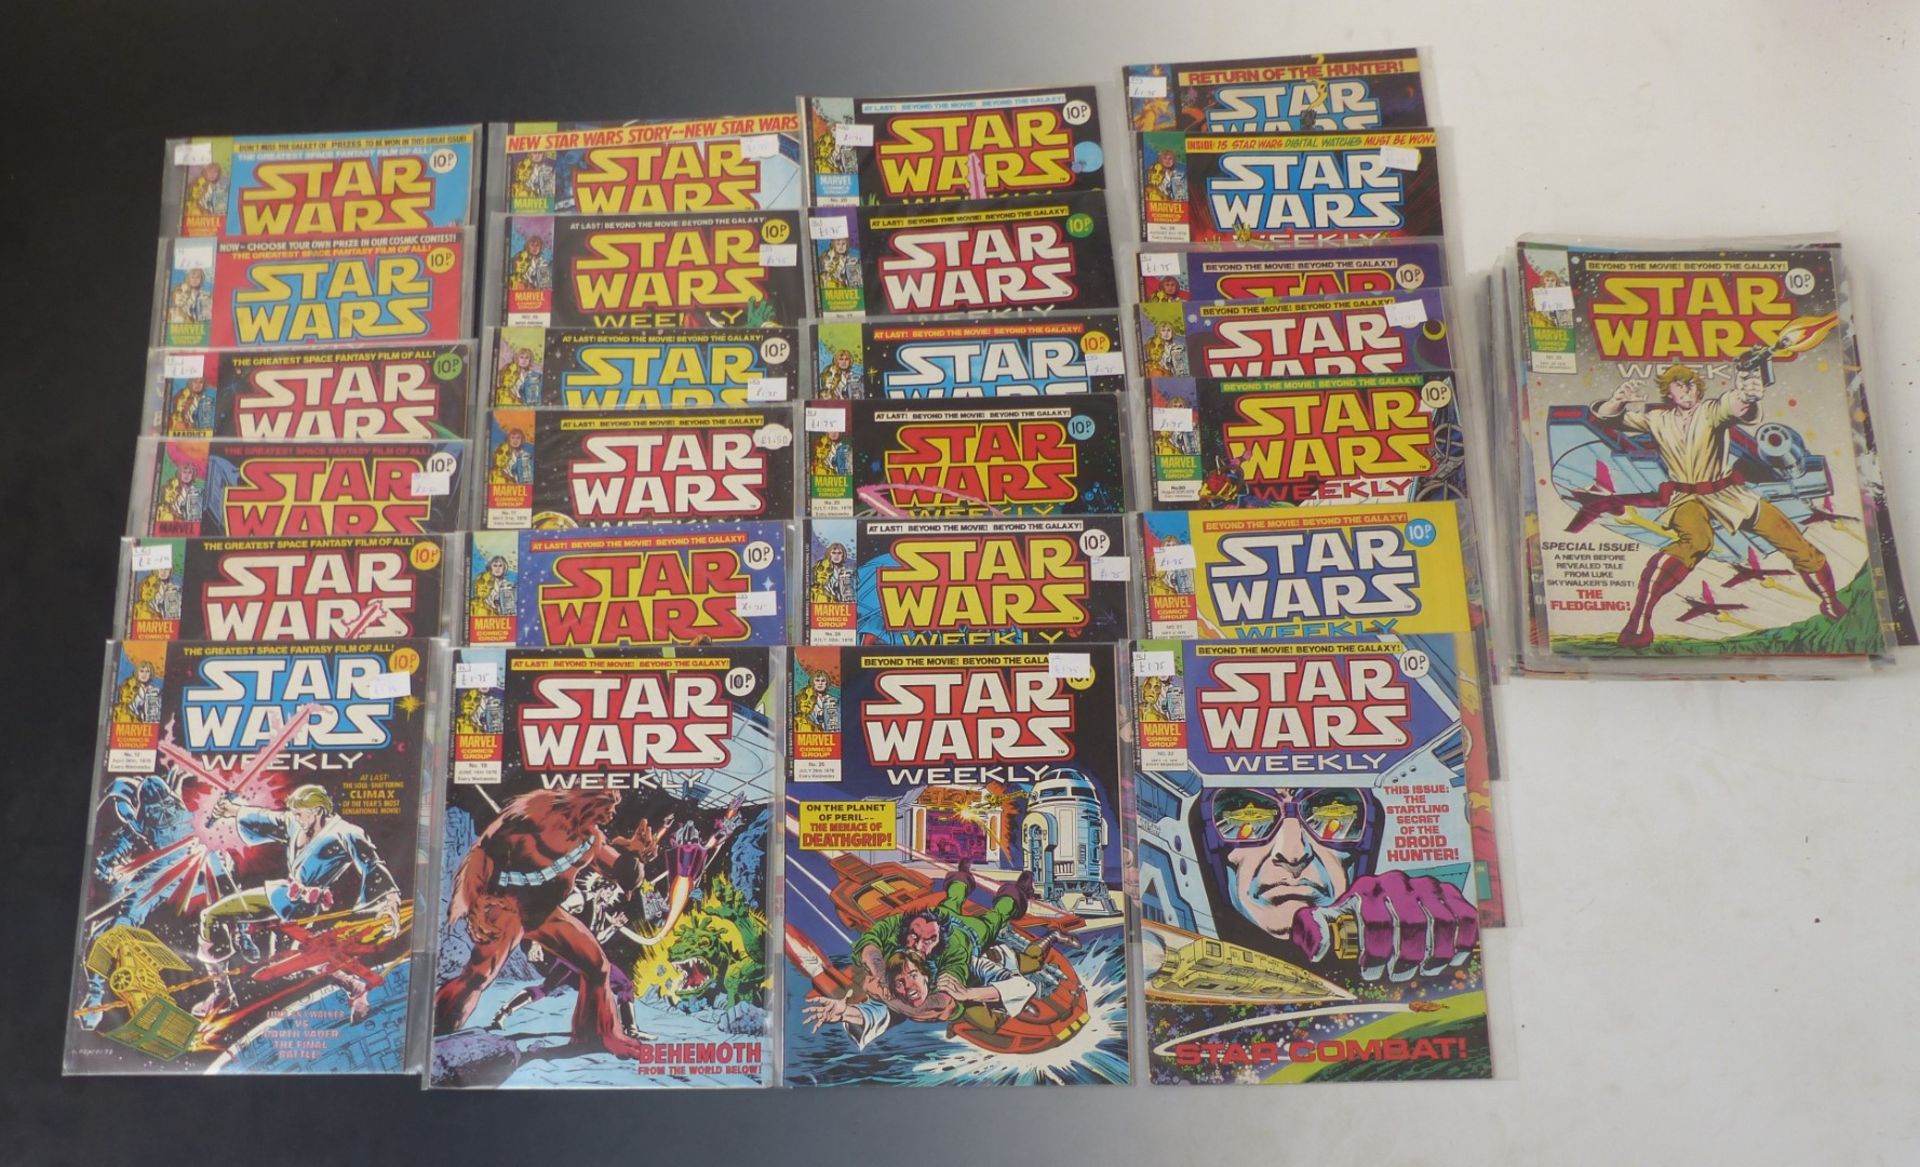 Fifty Marvel Star Wars Weekly comics dating from 1978-1979.